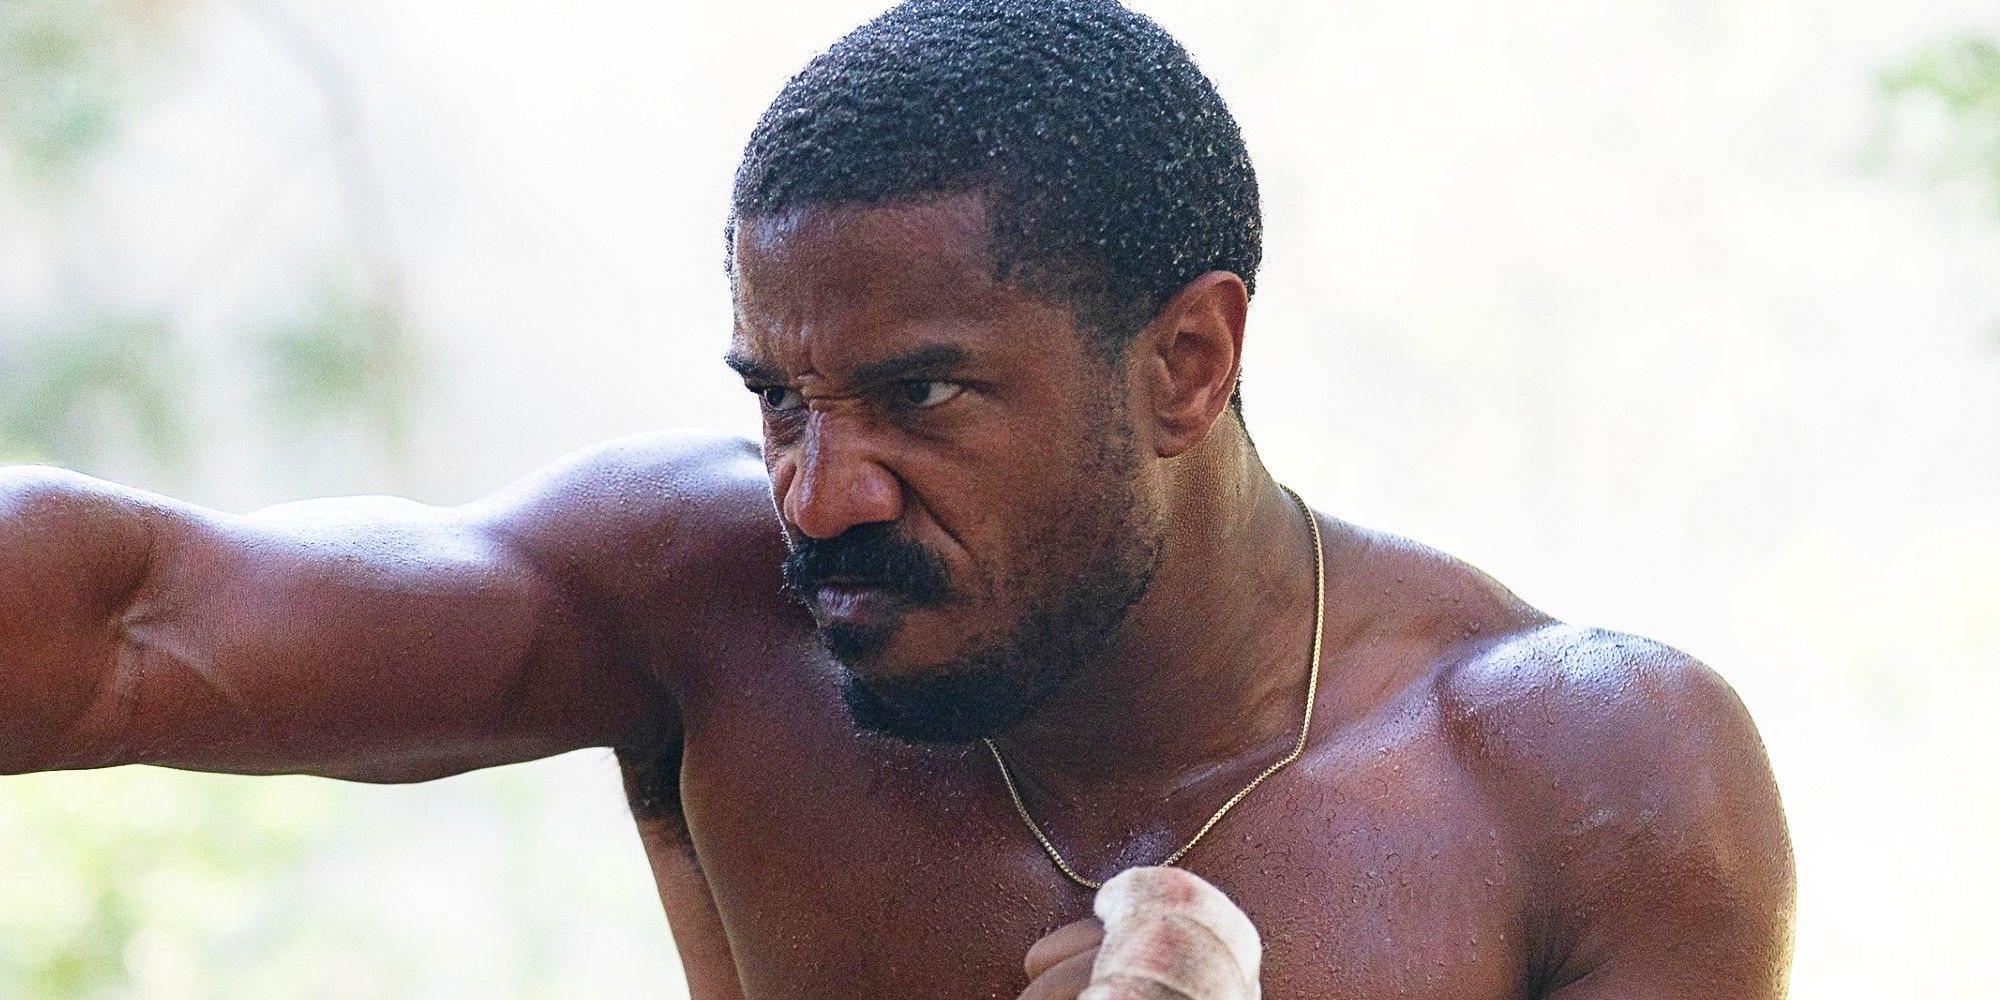 Michael B Jordan as Adonis training with wrapped knuckles in Creed 3